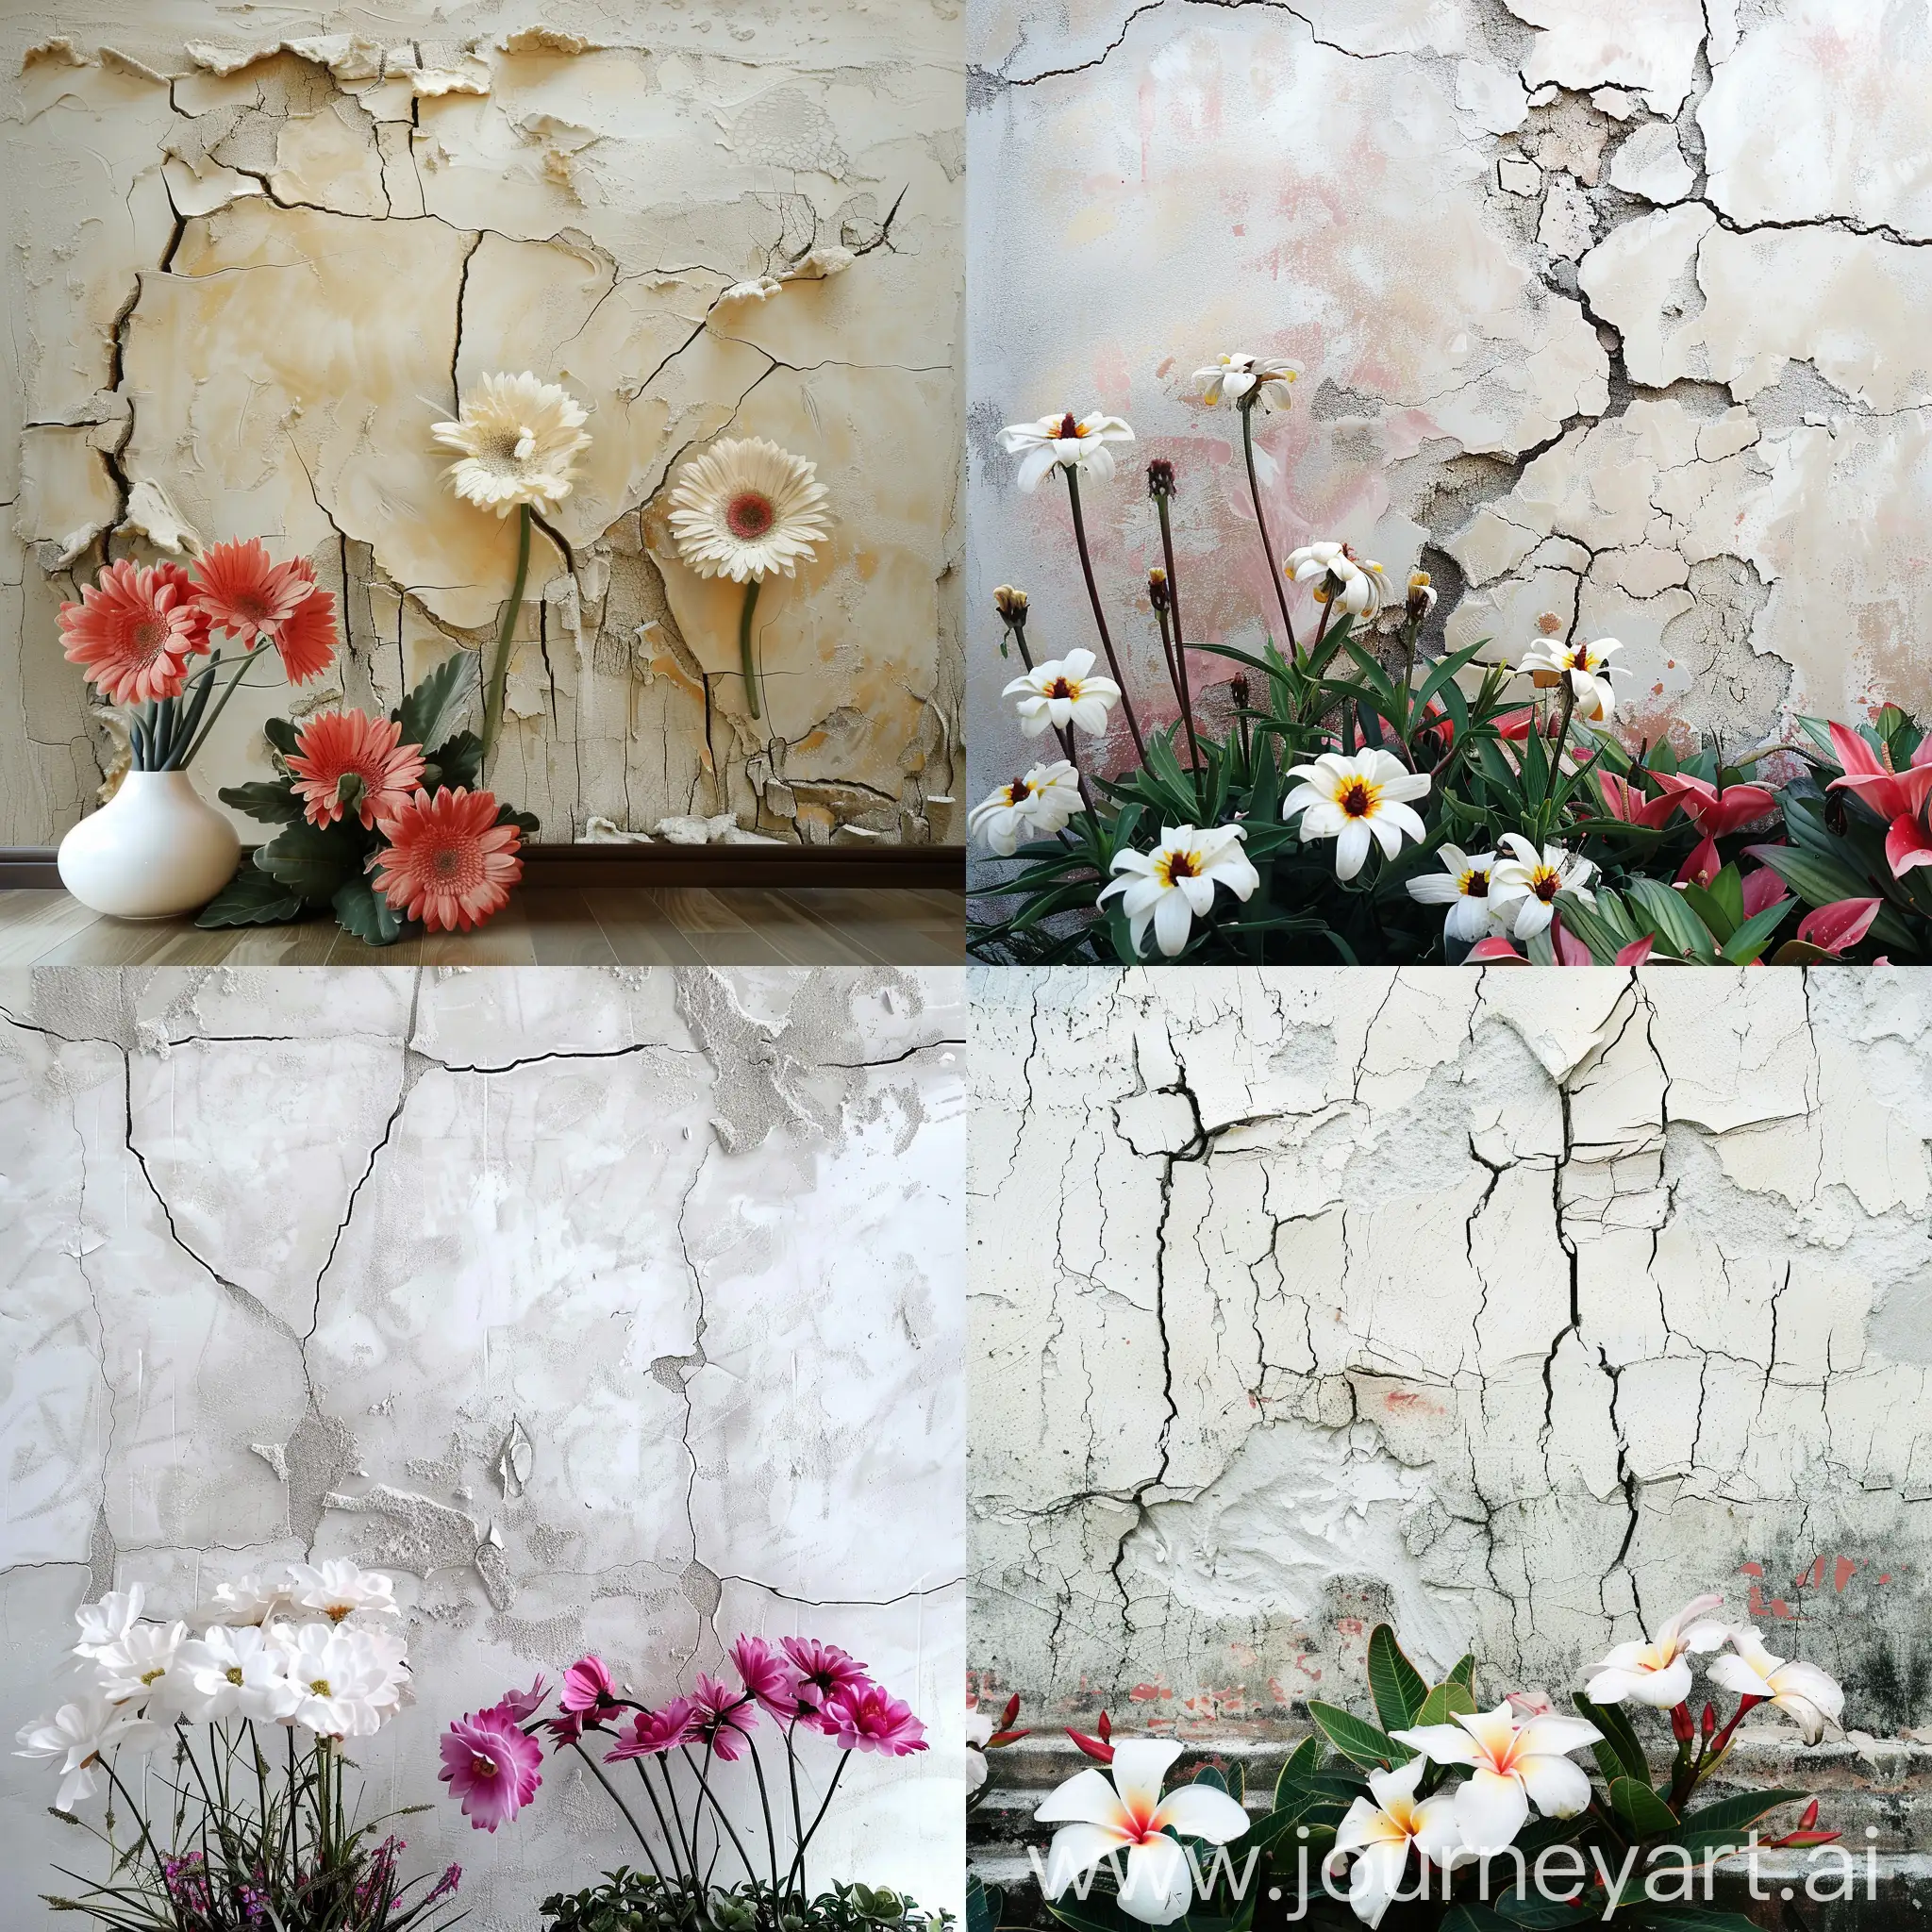 plaster wall with breaking-off pieces and cracks, textured, big ping flowers in front of the wall